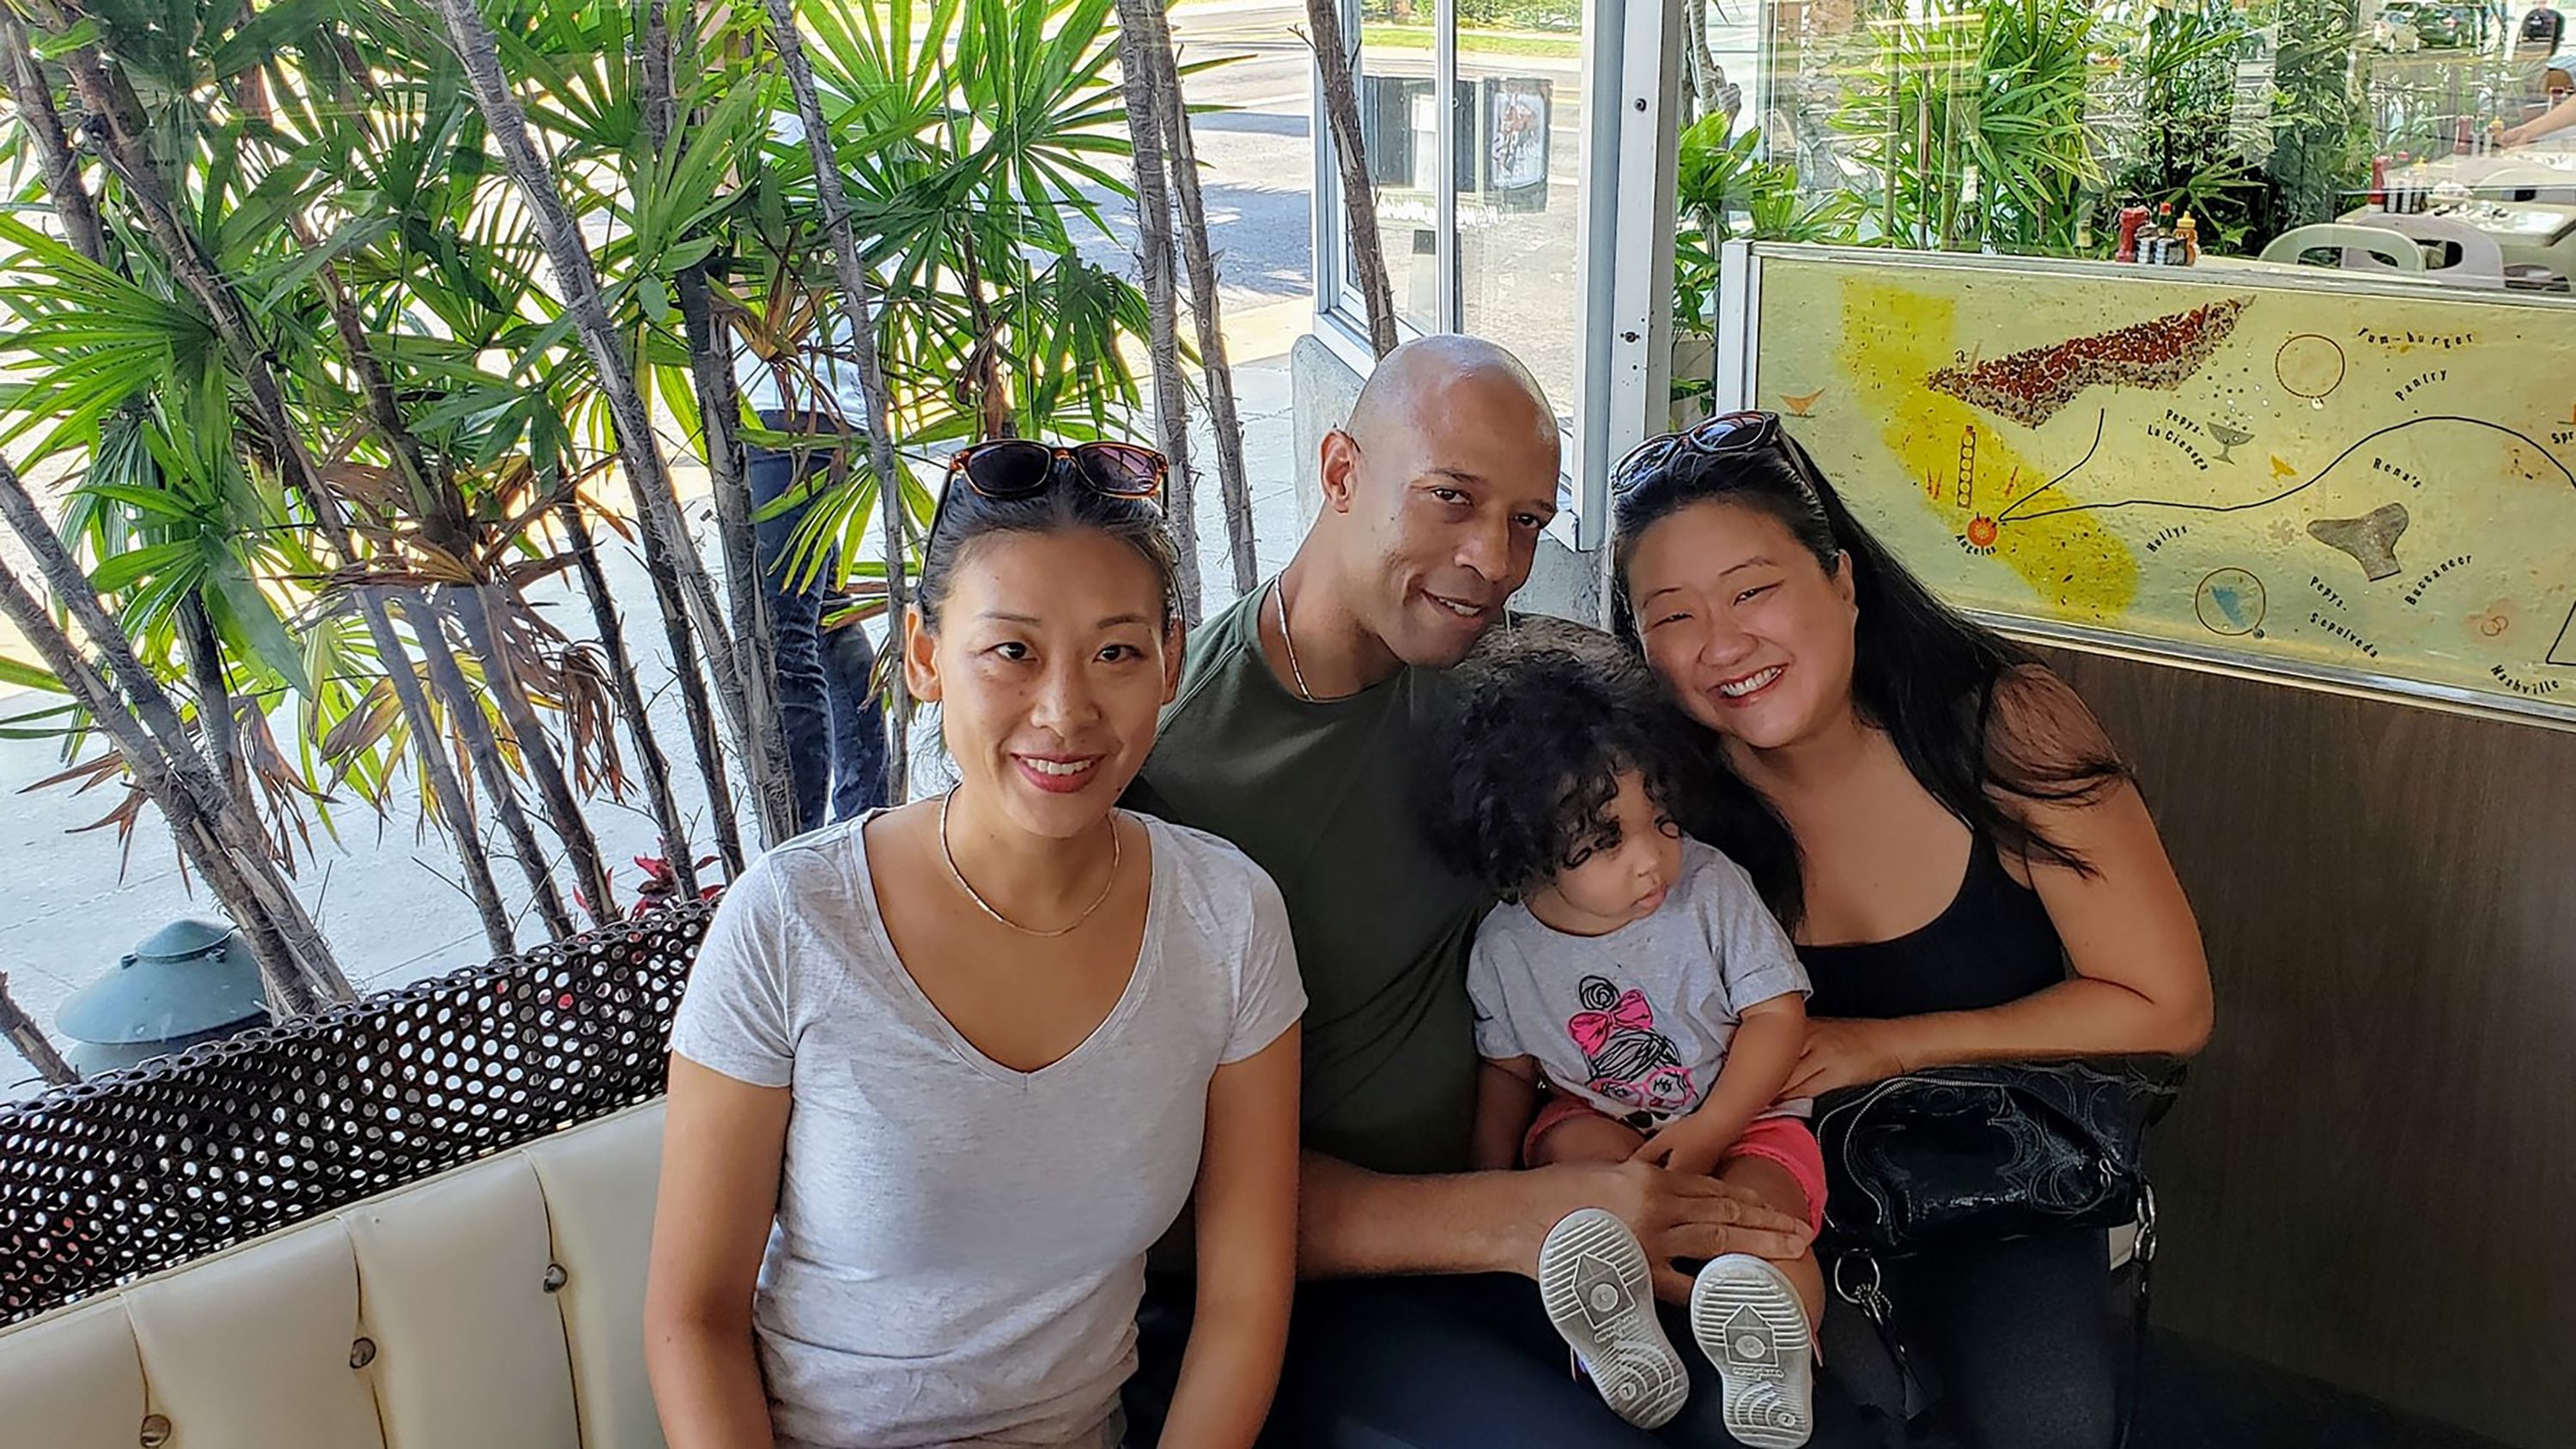 <strong>Lifelong friends: </strong>Here's DeBates with Gist and his wife and daughter in California. DeBates is godmother to Gist's daughter. 